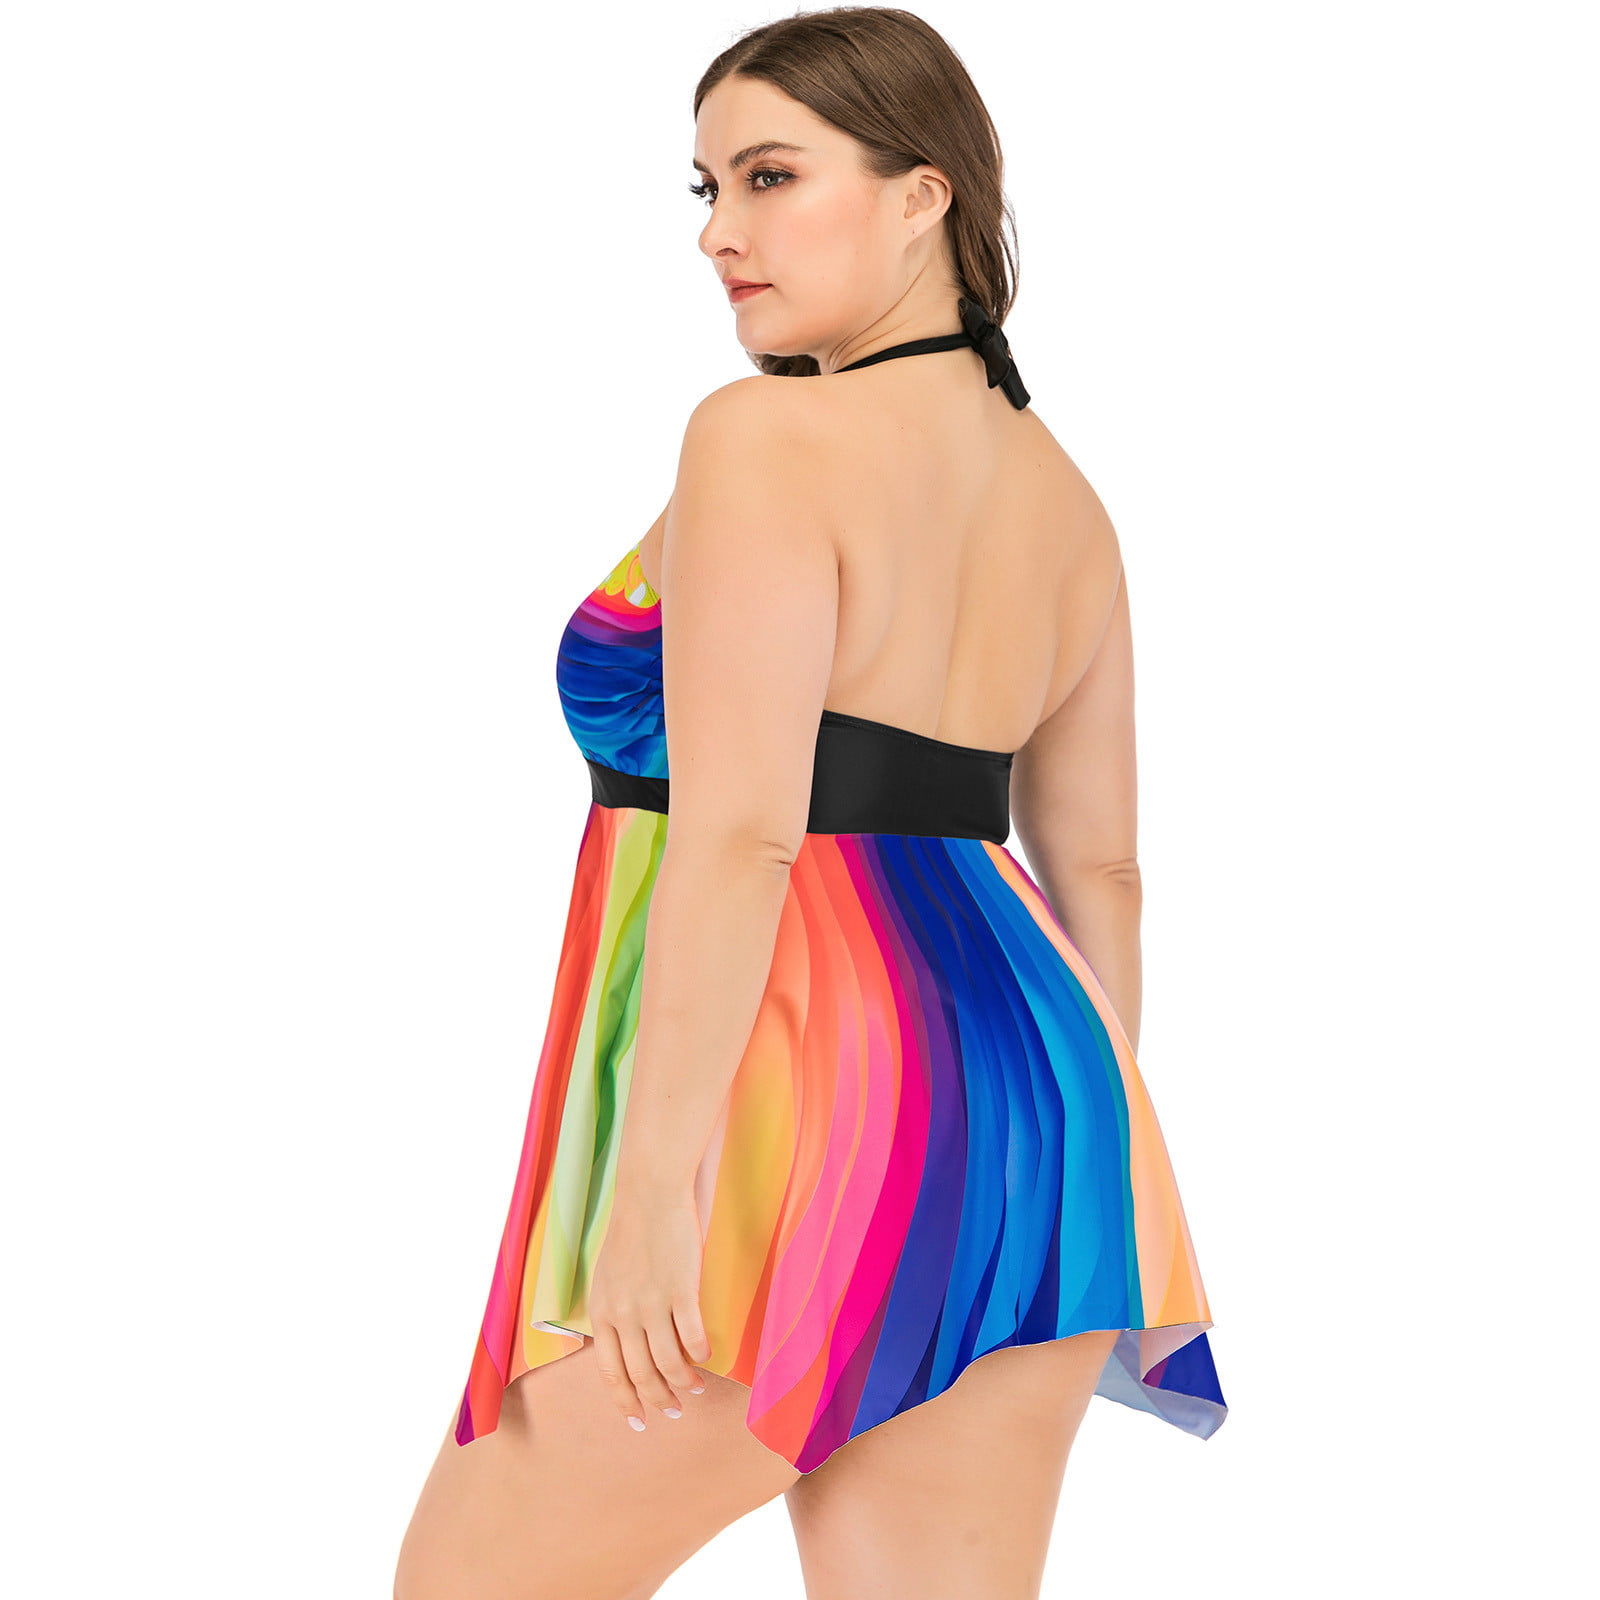 ZQGJB Plus Size Swim Dress for Women Colorful Striped Print Tummy Control  Bathing Suit with Boyshorts Two Piece Tankini Swimsuits Multicolor,3XL 